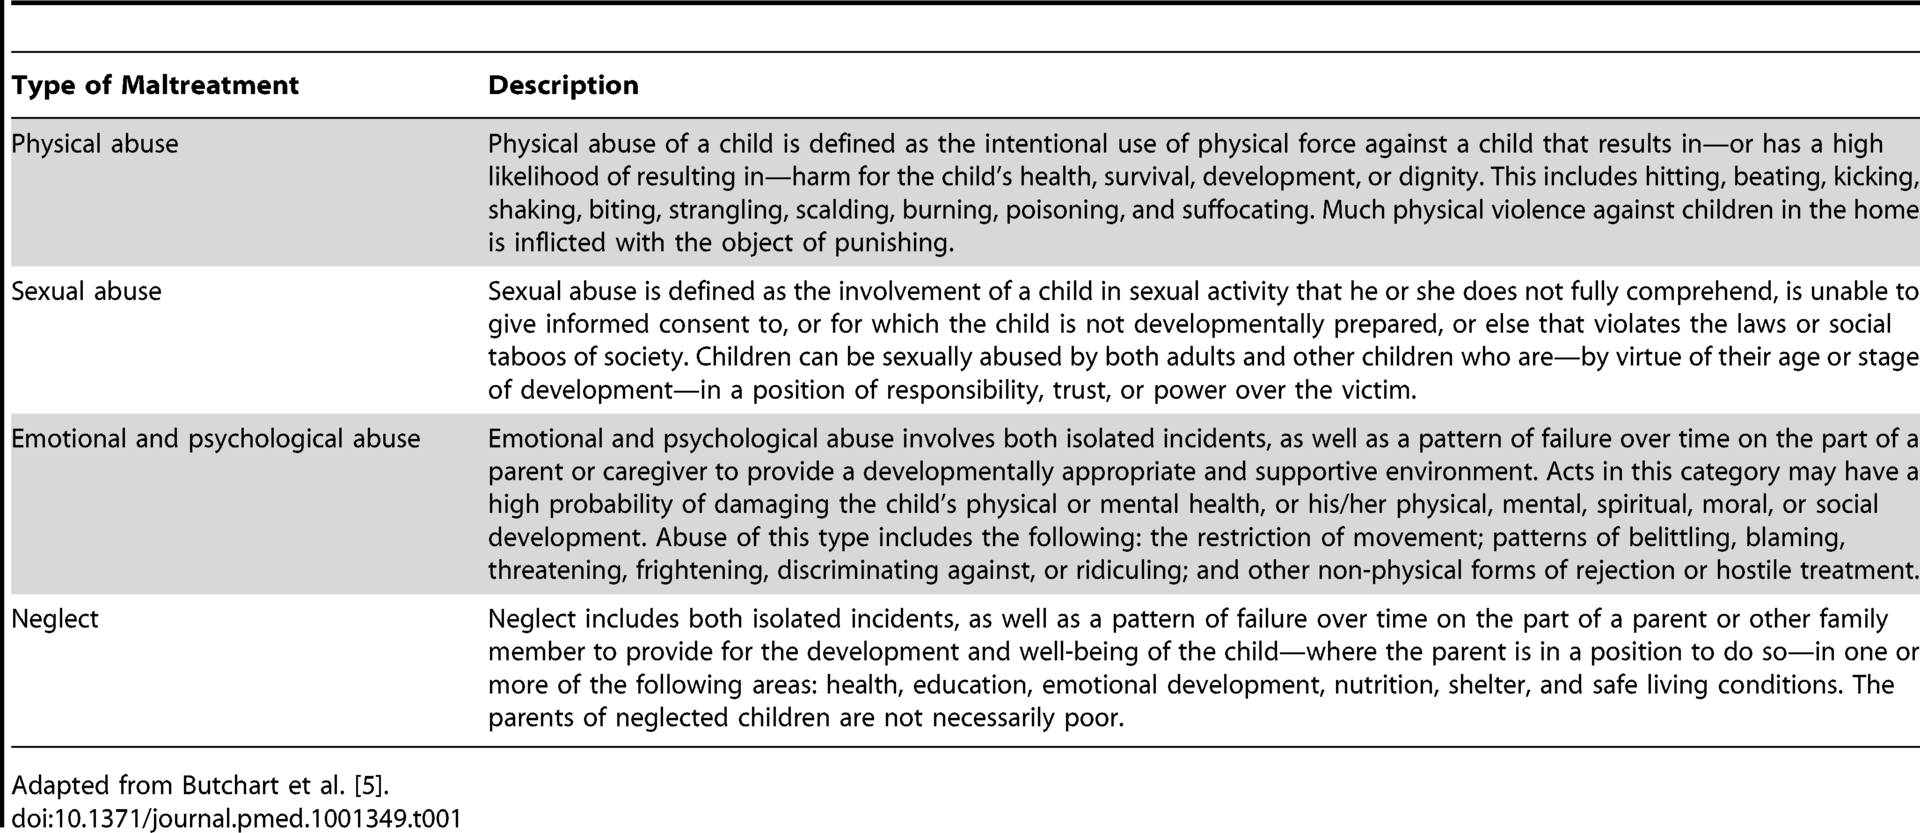 the long-term health consequences of child physical abuse, emotional